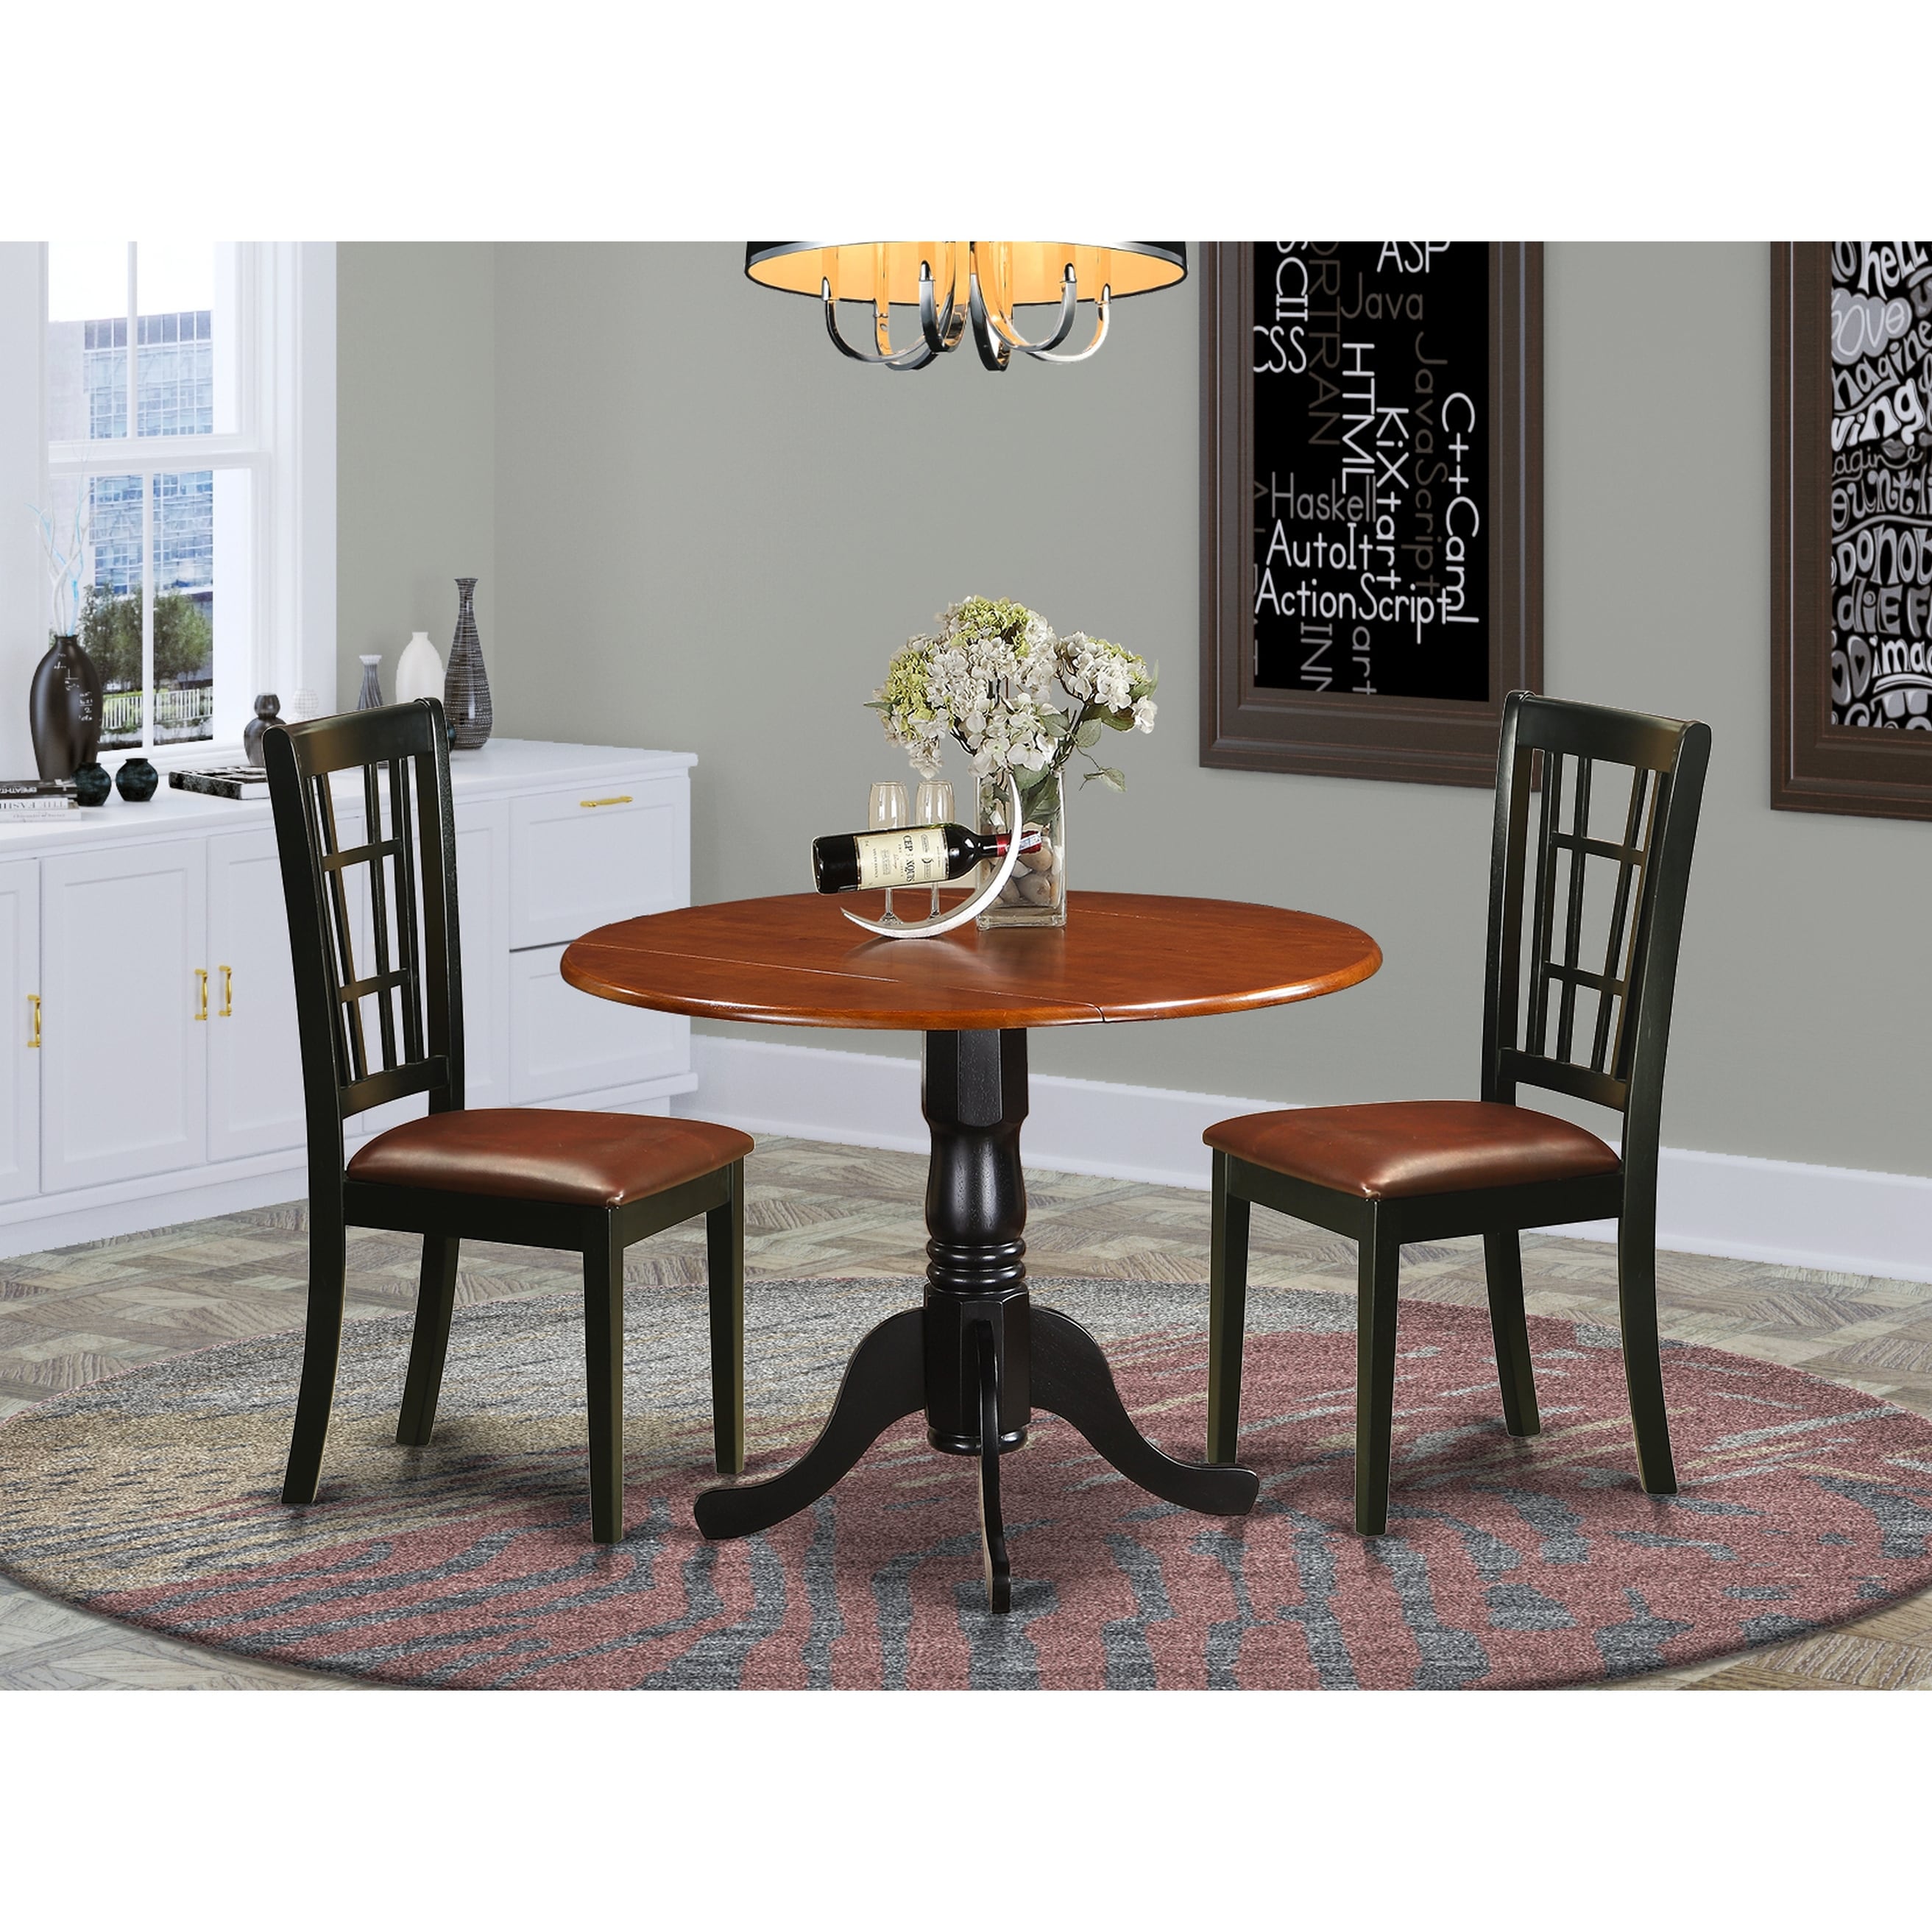 3 Piece Dublin Kitchen Table Set With Dining Table And 2 Solid Wood Kitchen Chairs On Sale Overstock 12028019